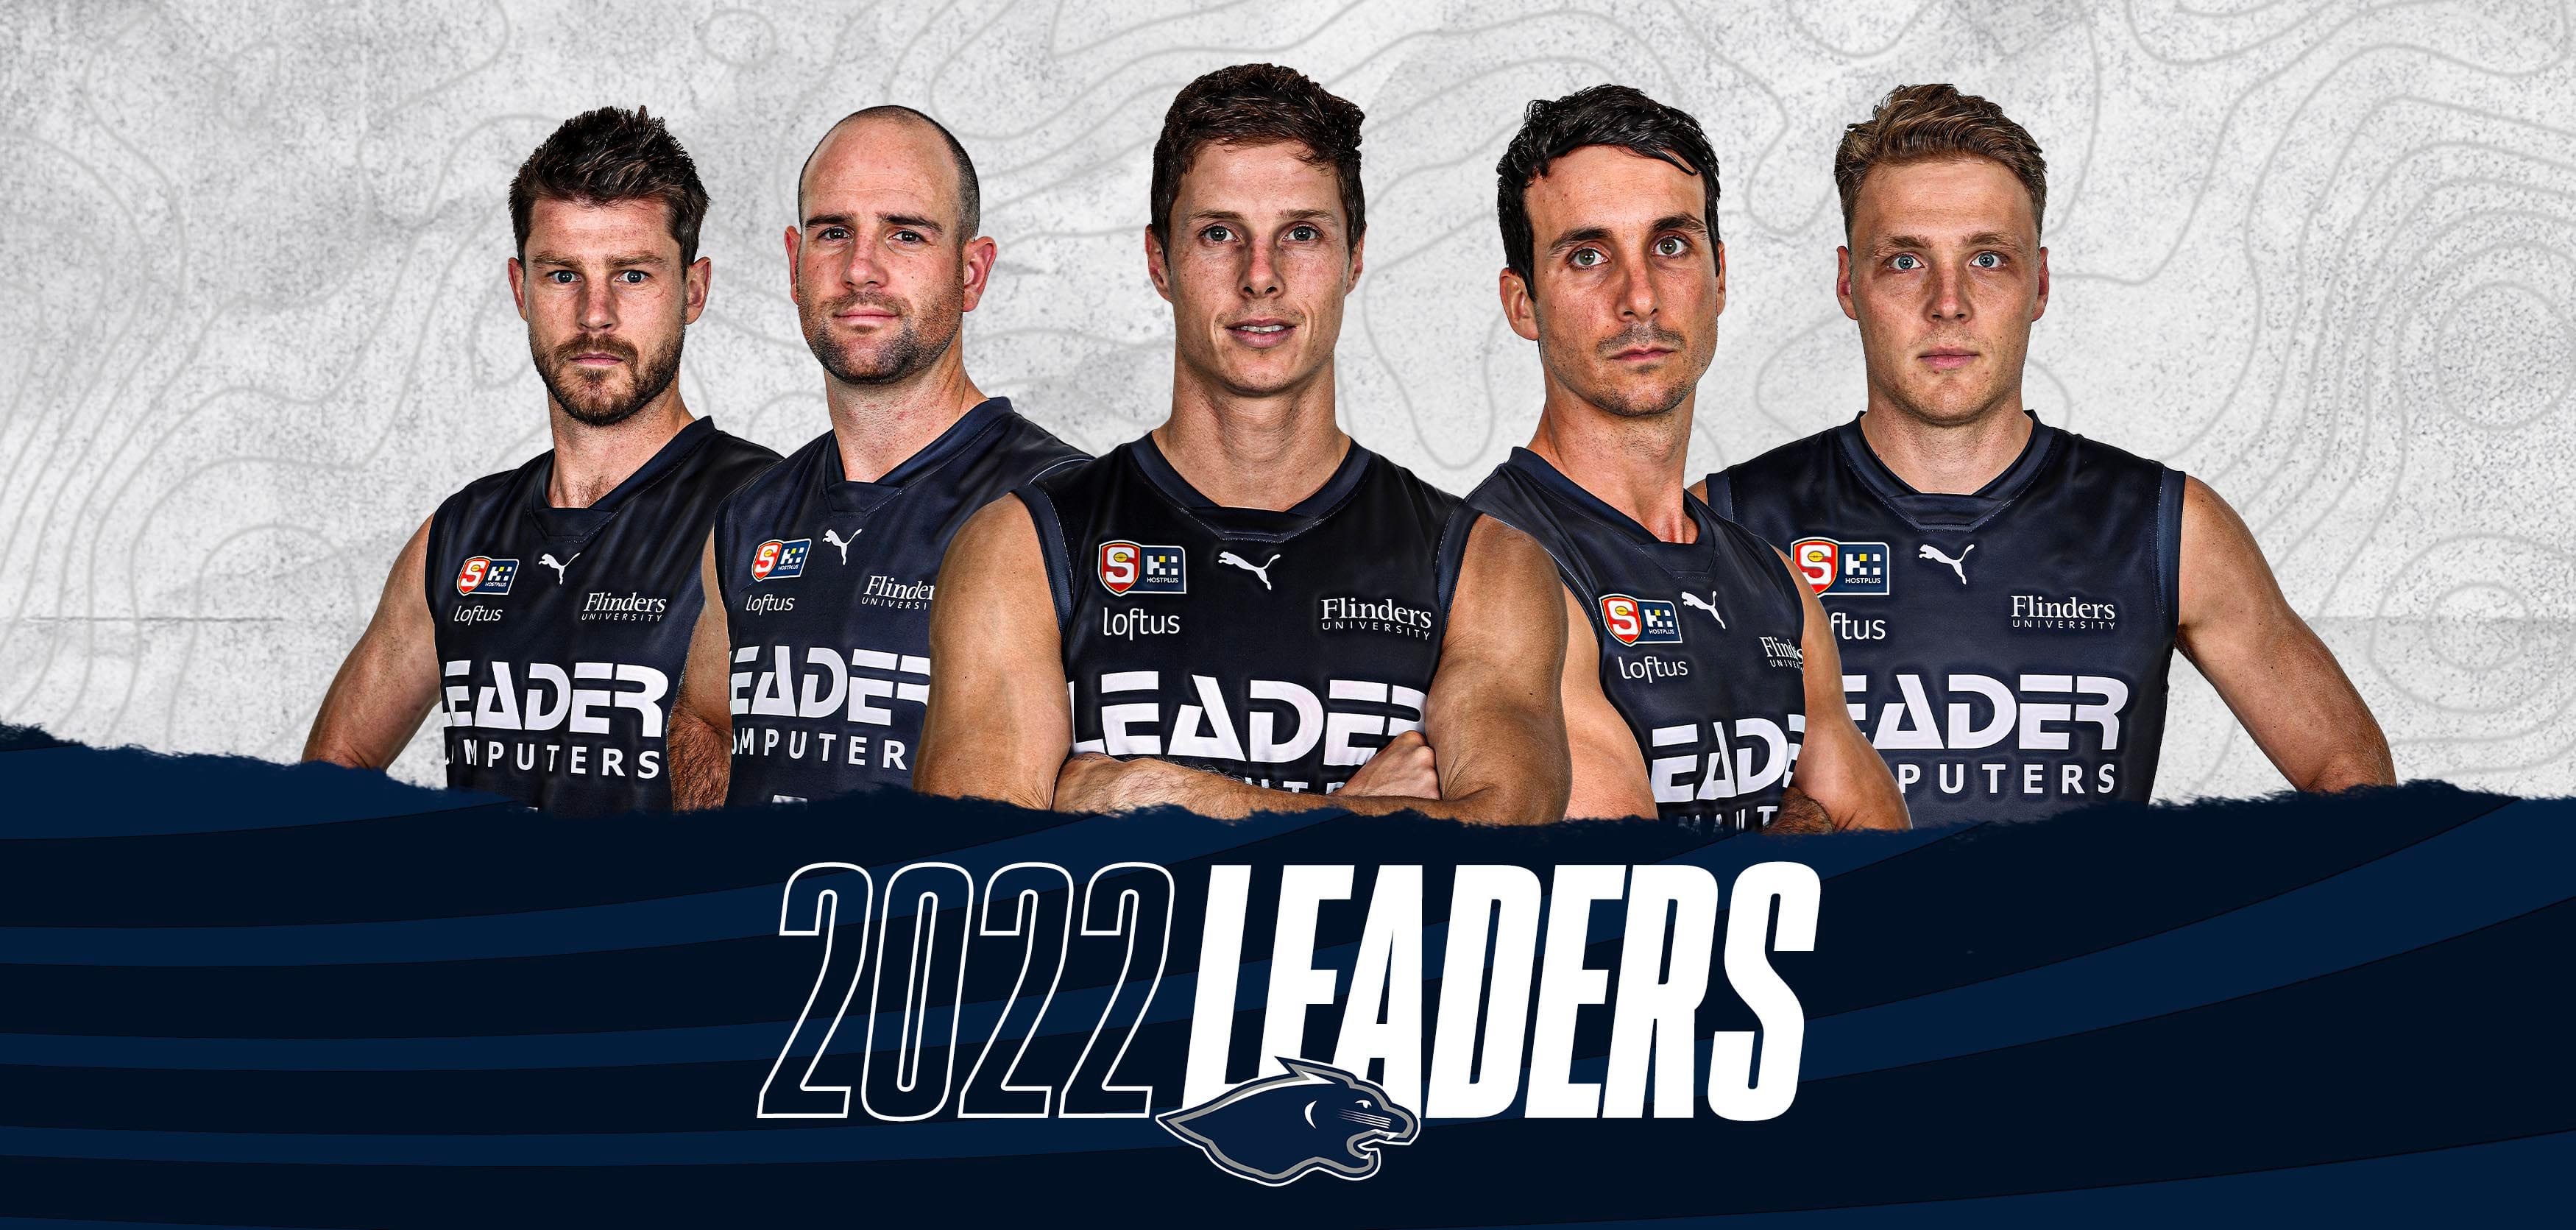 Panthers unveil 2022 Leadership Group